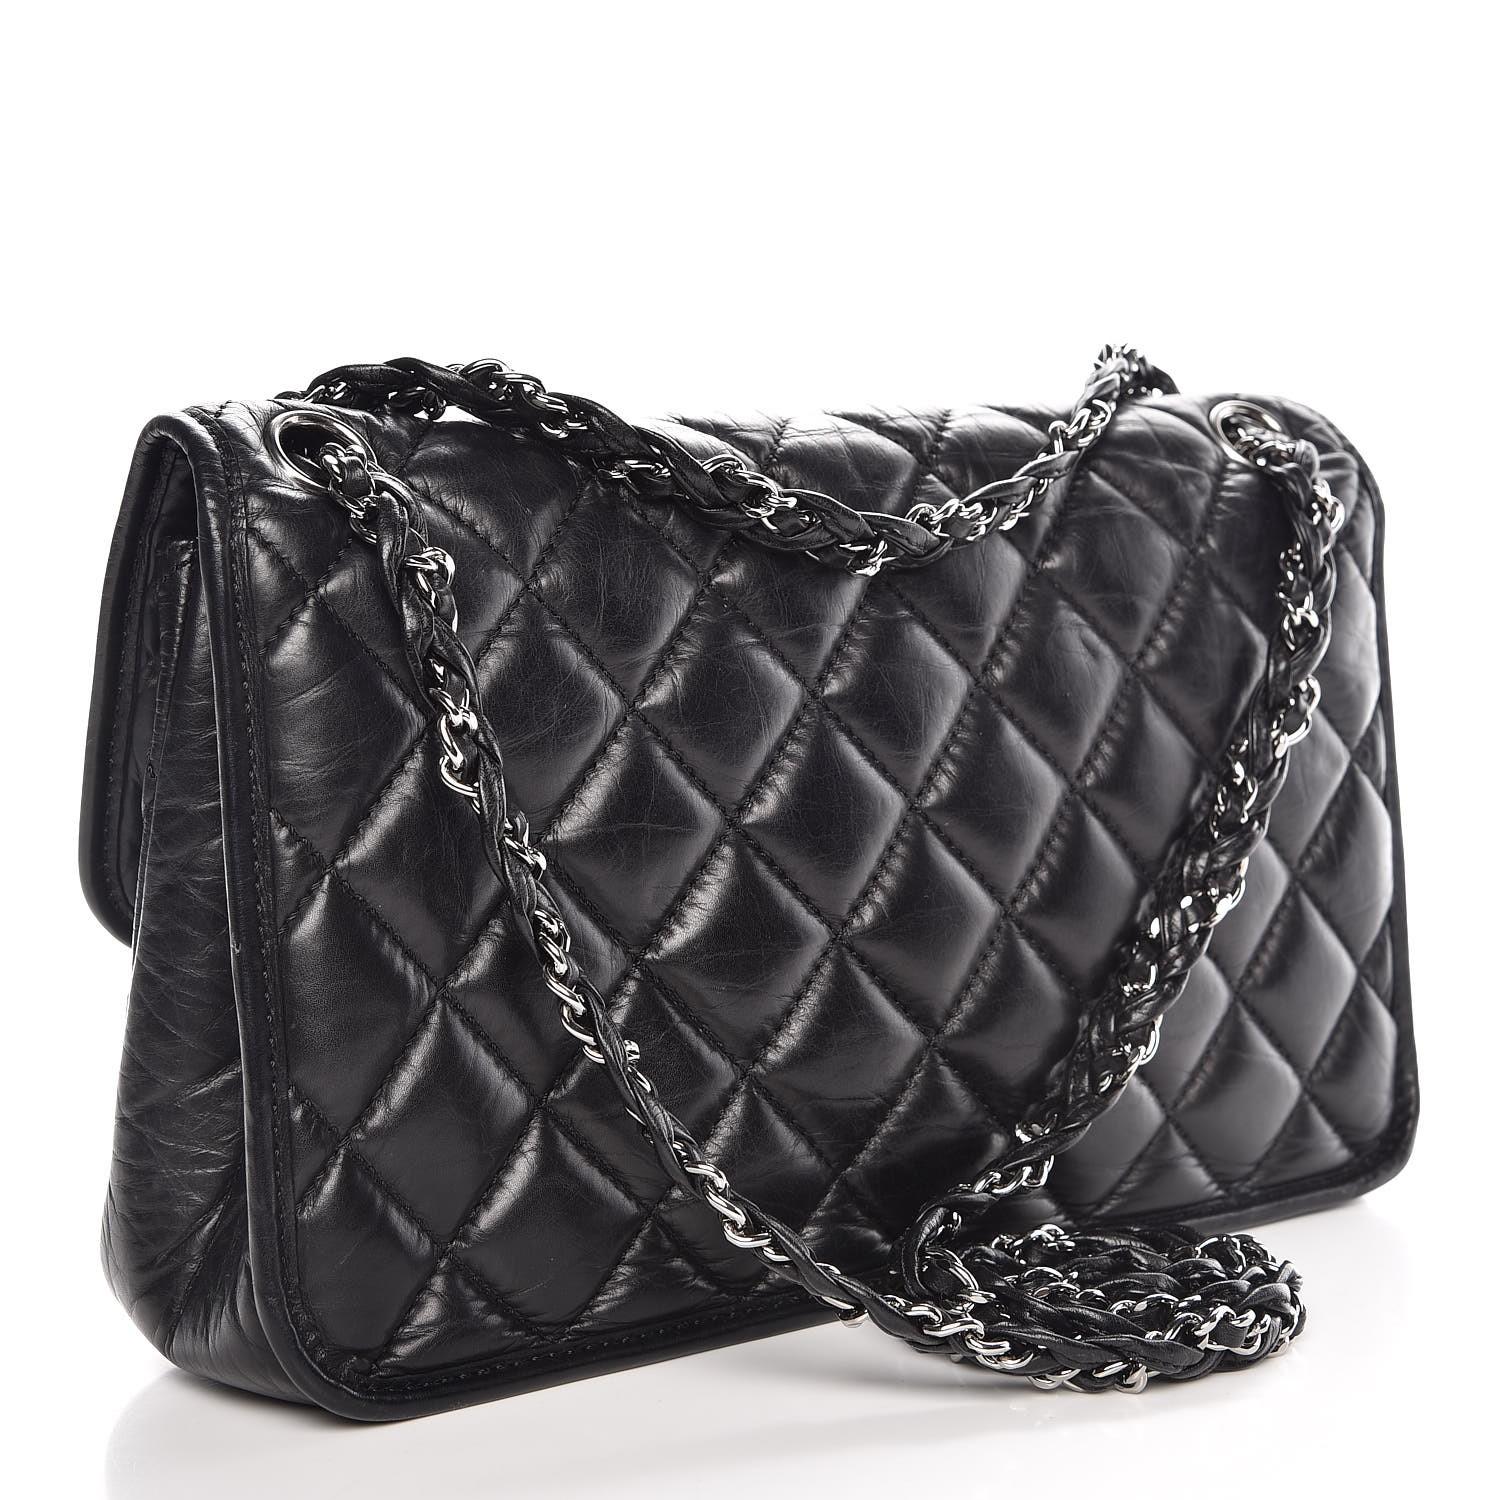 Chanel 2005 Vintage Soft Distressed Leather Diamond Quilted Classic Flap Bag Unisexe en vente